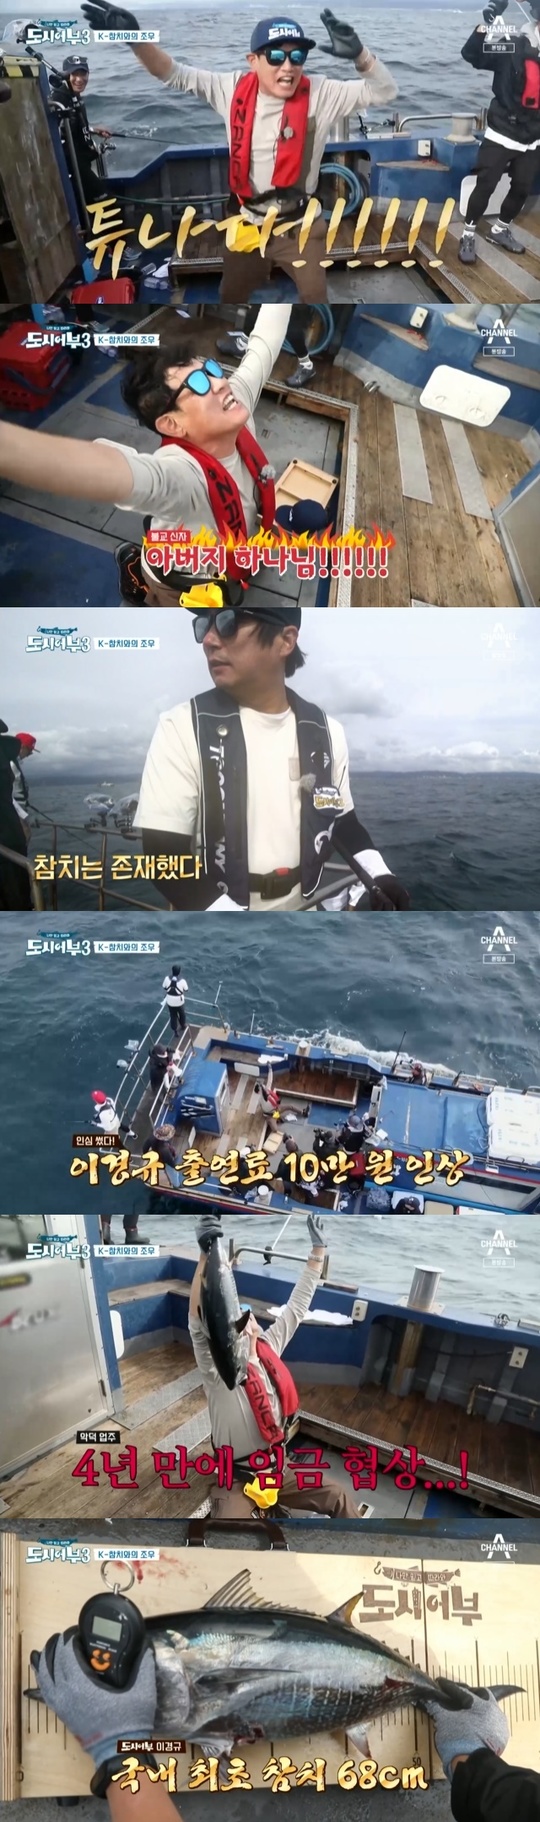 Lee Kyung-kyu was promised a 100,000 won salary increase on the spot for his legendary performance of catching a six-tuna on the East Coast.In the 23rd episode of Channel A entertainment Follow Me OnlyThe Fishermen and the City City Season 3 (hereinafter referred to as The The Fishermen and the City), which was broadcast on October 21, the main Fencing Sabre players Kim Jung-hwan, Koo Bon-gil and Oh Sang-wook of the 2020 Tokyo Olympics played the Great Samchi and Samchi Fishing Team Battle in Gyeongju, Gyeongbuk.Lee Kyung-kyu showed the miracle of catching tuna for the first time among The Fishermen and the City after a huge bite.Lee Kyung-kyu danced in a big room as soon as he walked the tuna, shouting Tunada and the other fishermen were genuinely surprised and open their mouths and watched.Lee Kyung-kyu roared, I am the son of the dragon king, and If you have a tuna on the east coast, tell him to come out.Lee Kyung-kyu said, Catch a hundred triceps. Tuna said it was an unparalleled joy.On the other hand, the The Fishermen and the City just admired, saying, Tuna is caught in our country, Wow, there is a real tuna.